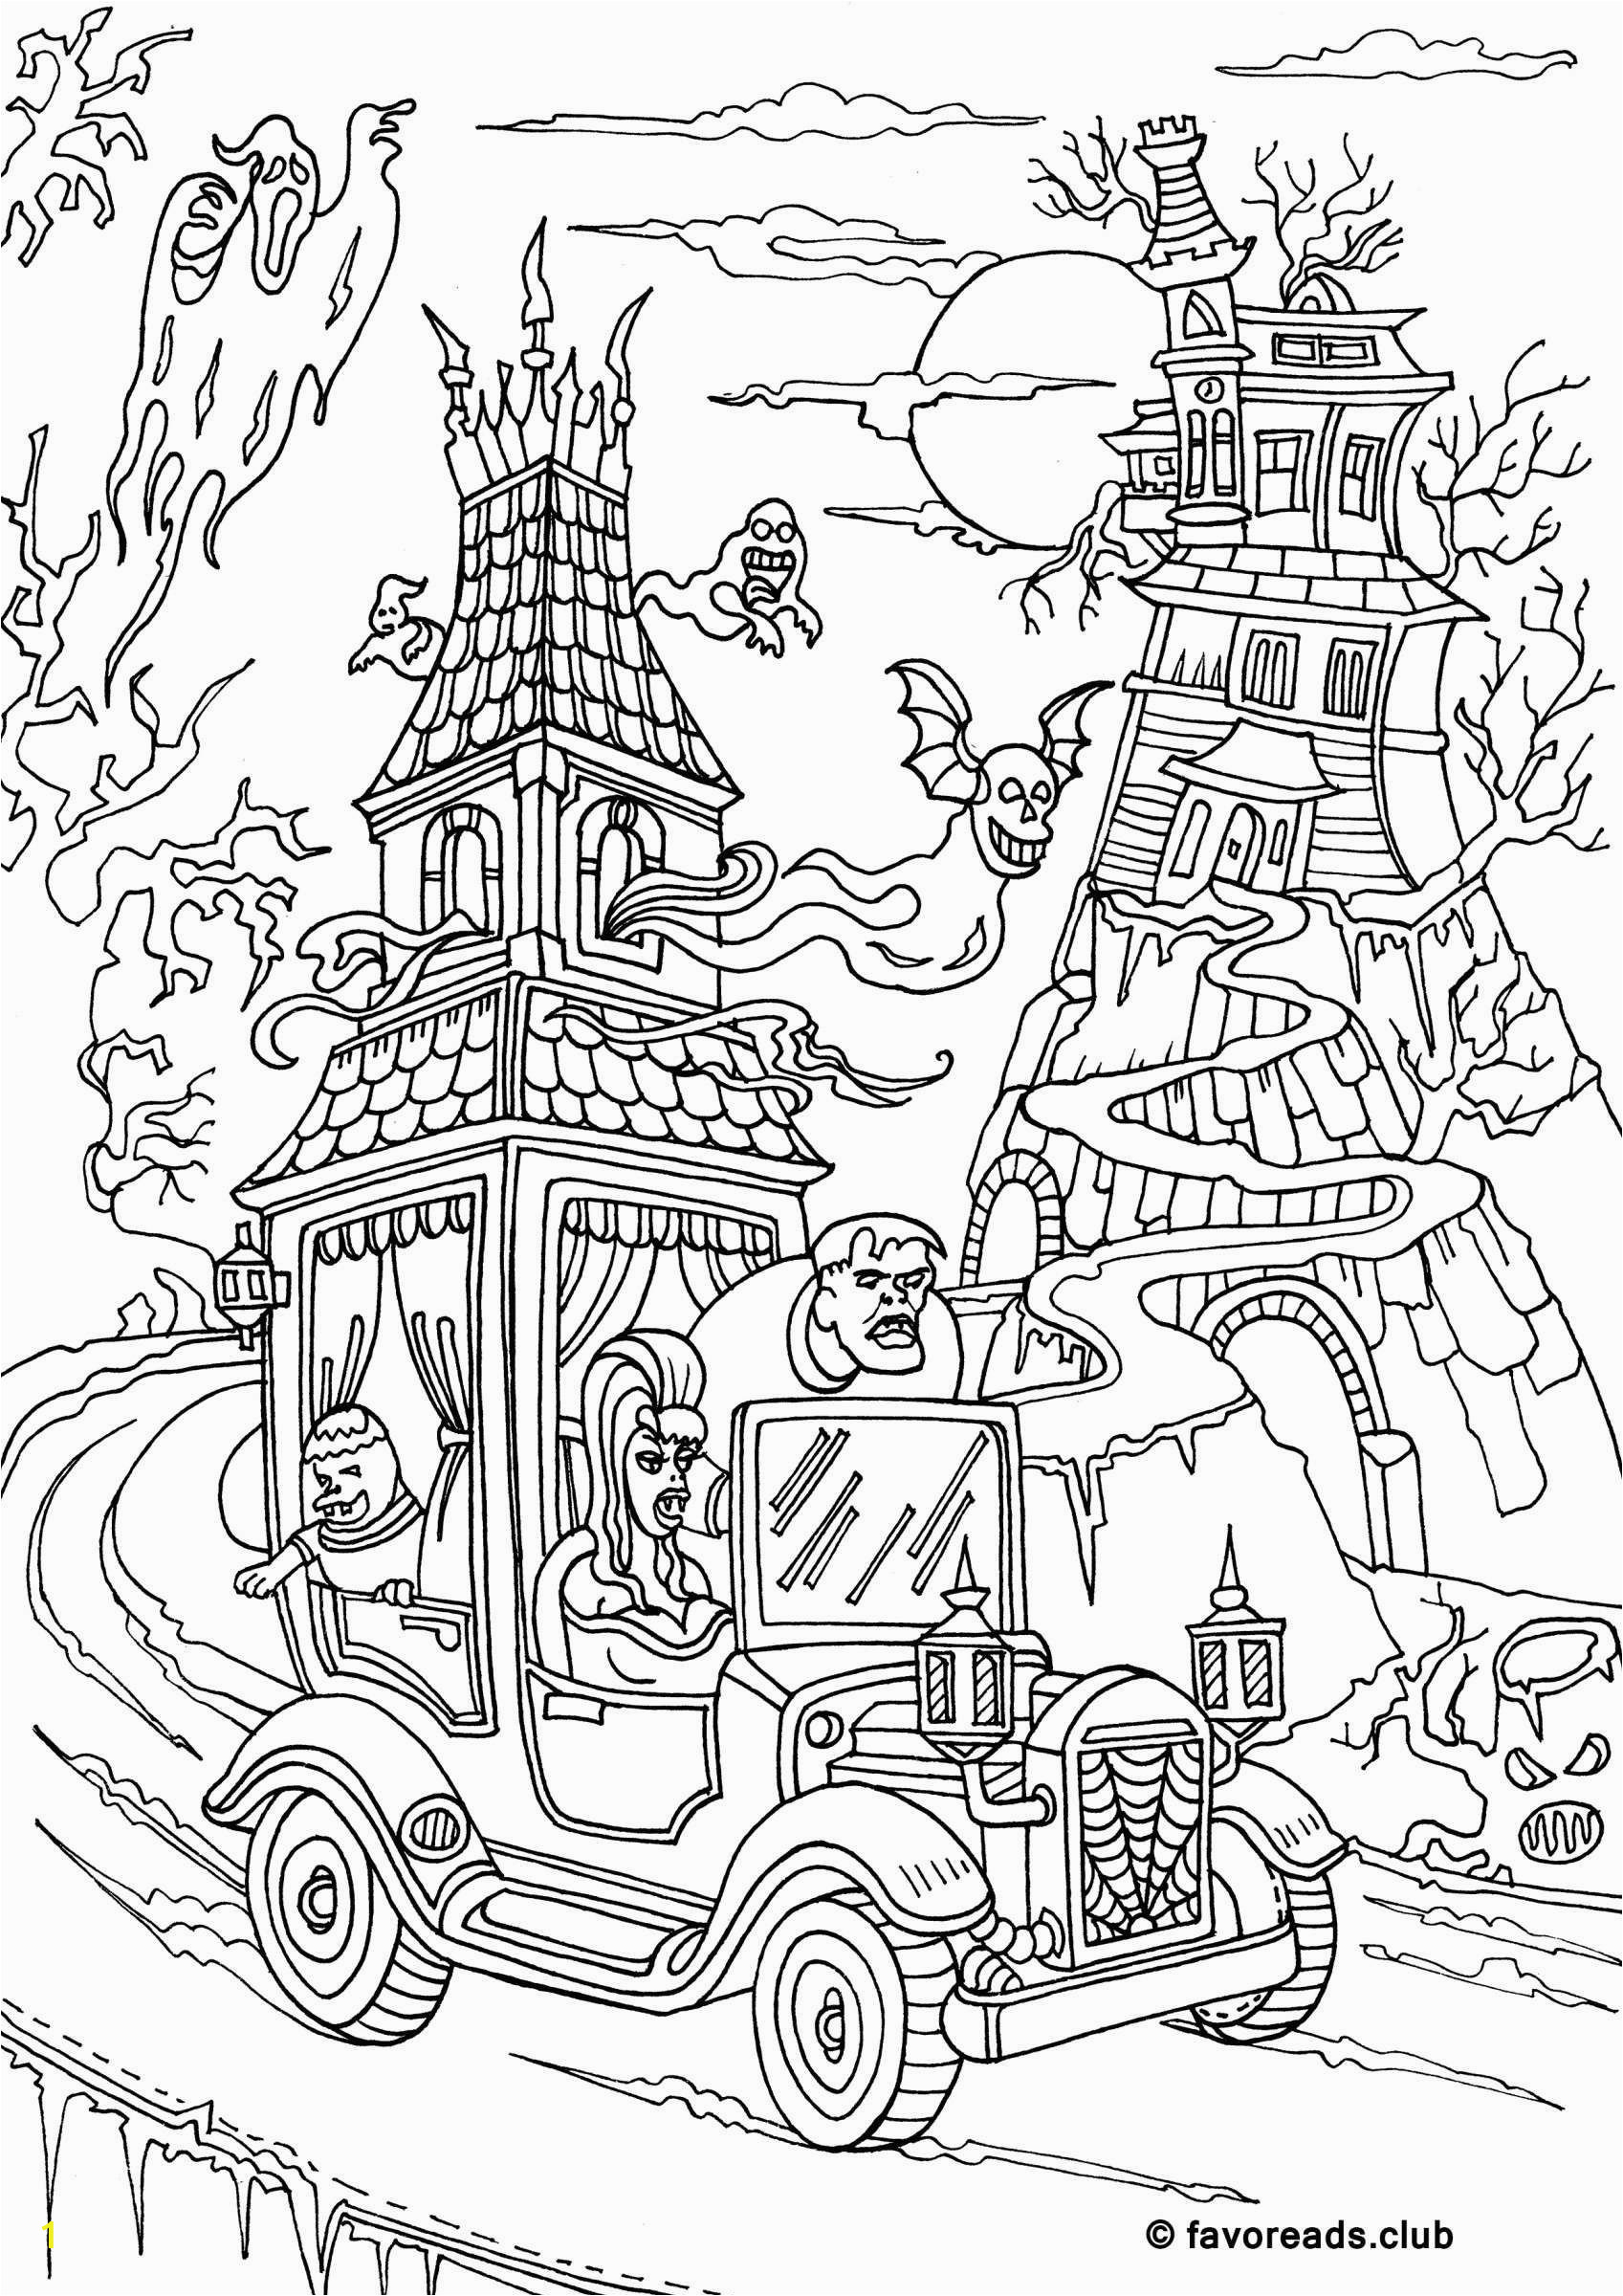 Halloween Horror Coloring Pages the Best Free Adult Coloring Book Pages